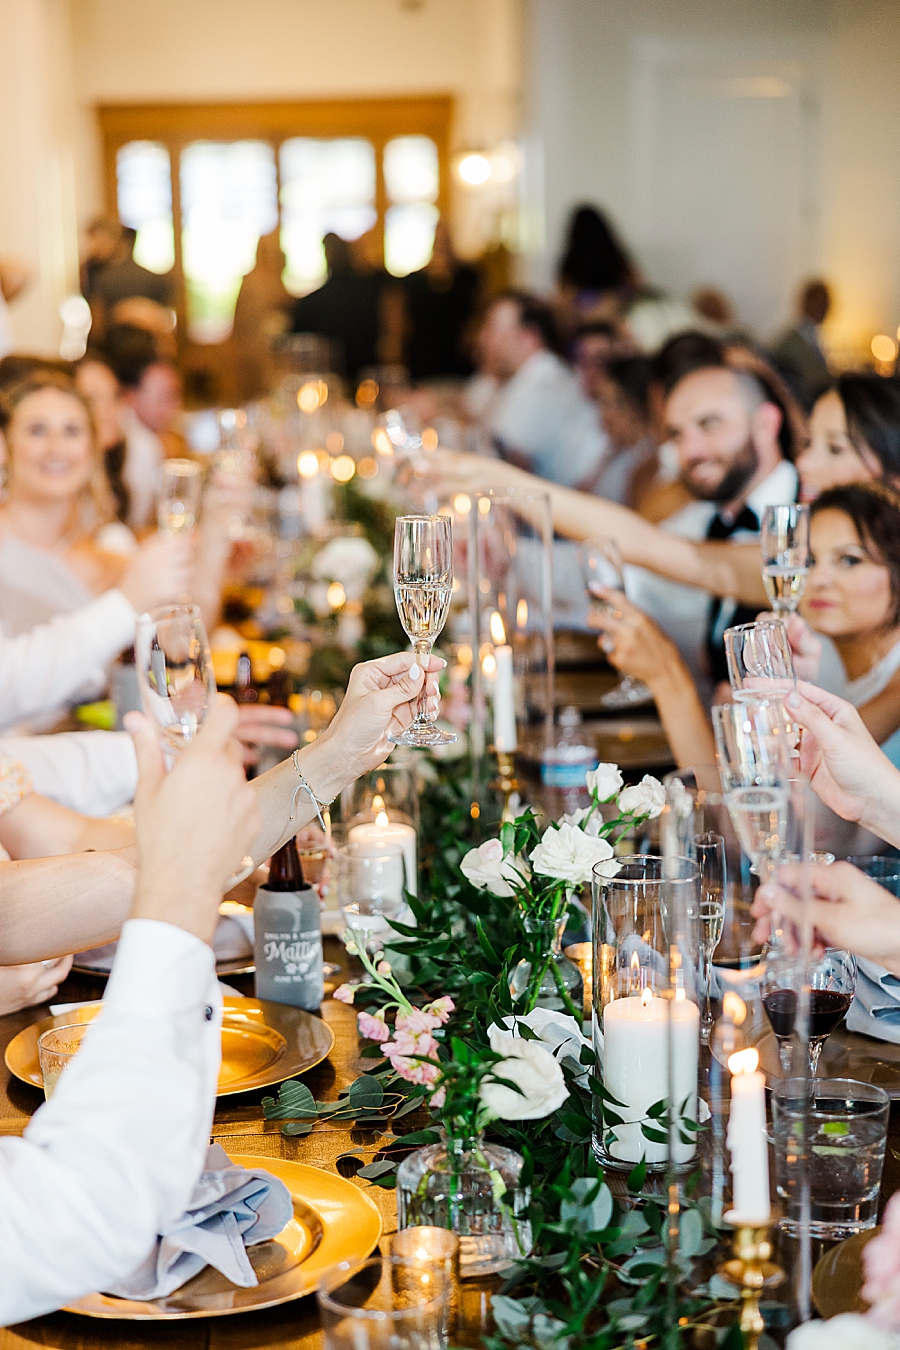 guests toasting glasses